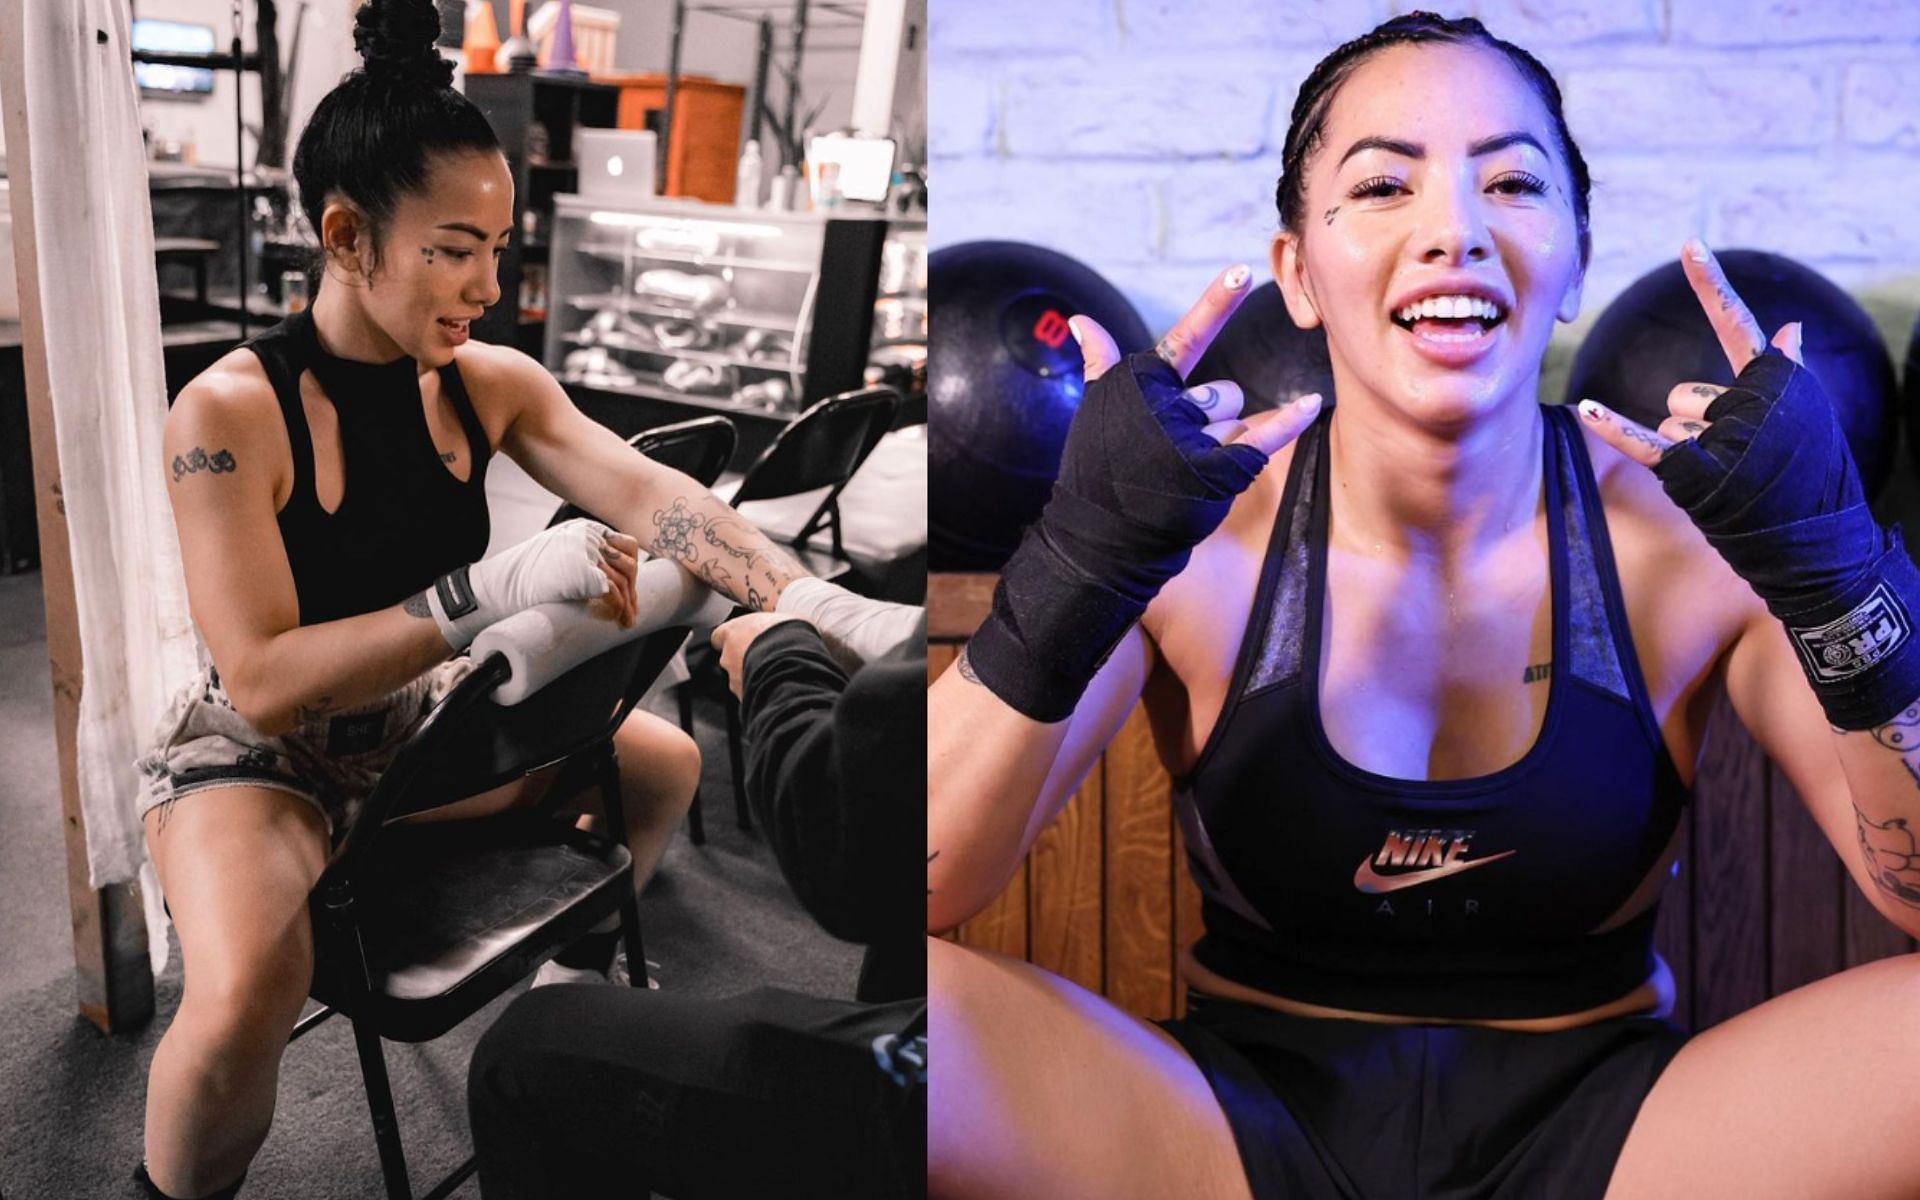 Who is Lil Kymchii? Real identity of the social media influencer who fought  on KSI vs. Joe Fournier undercard